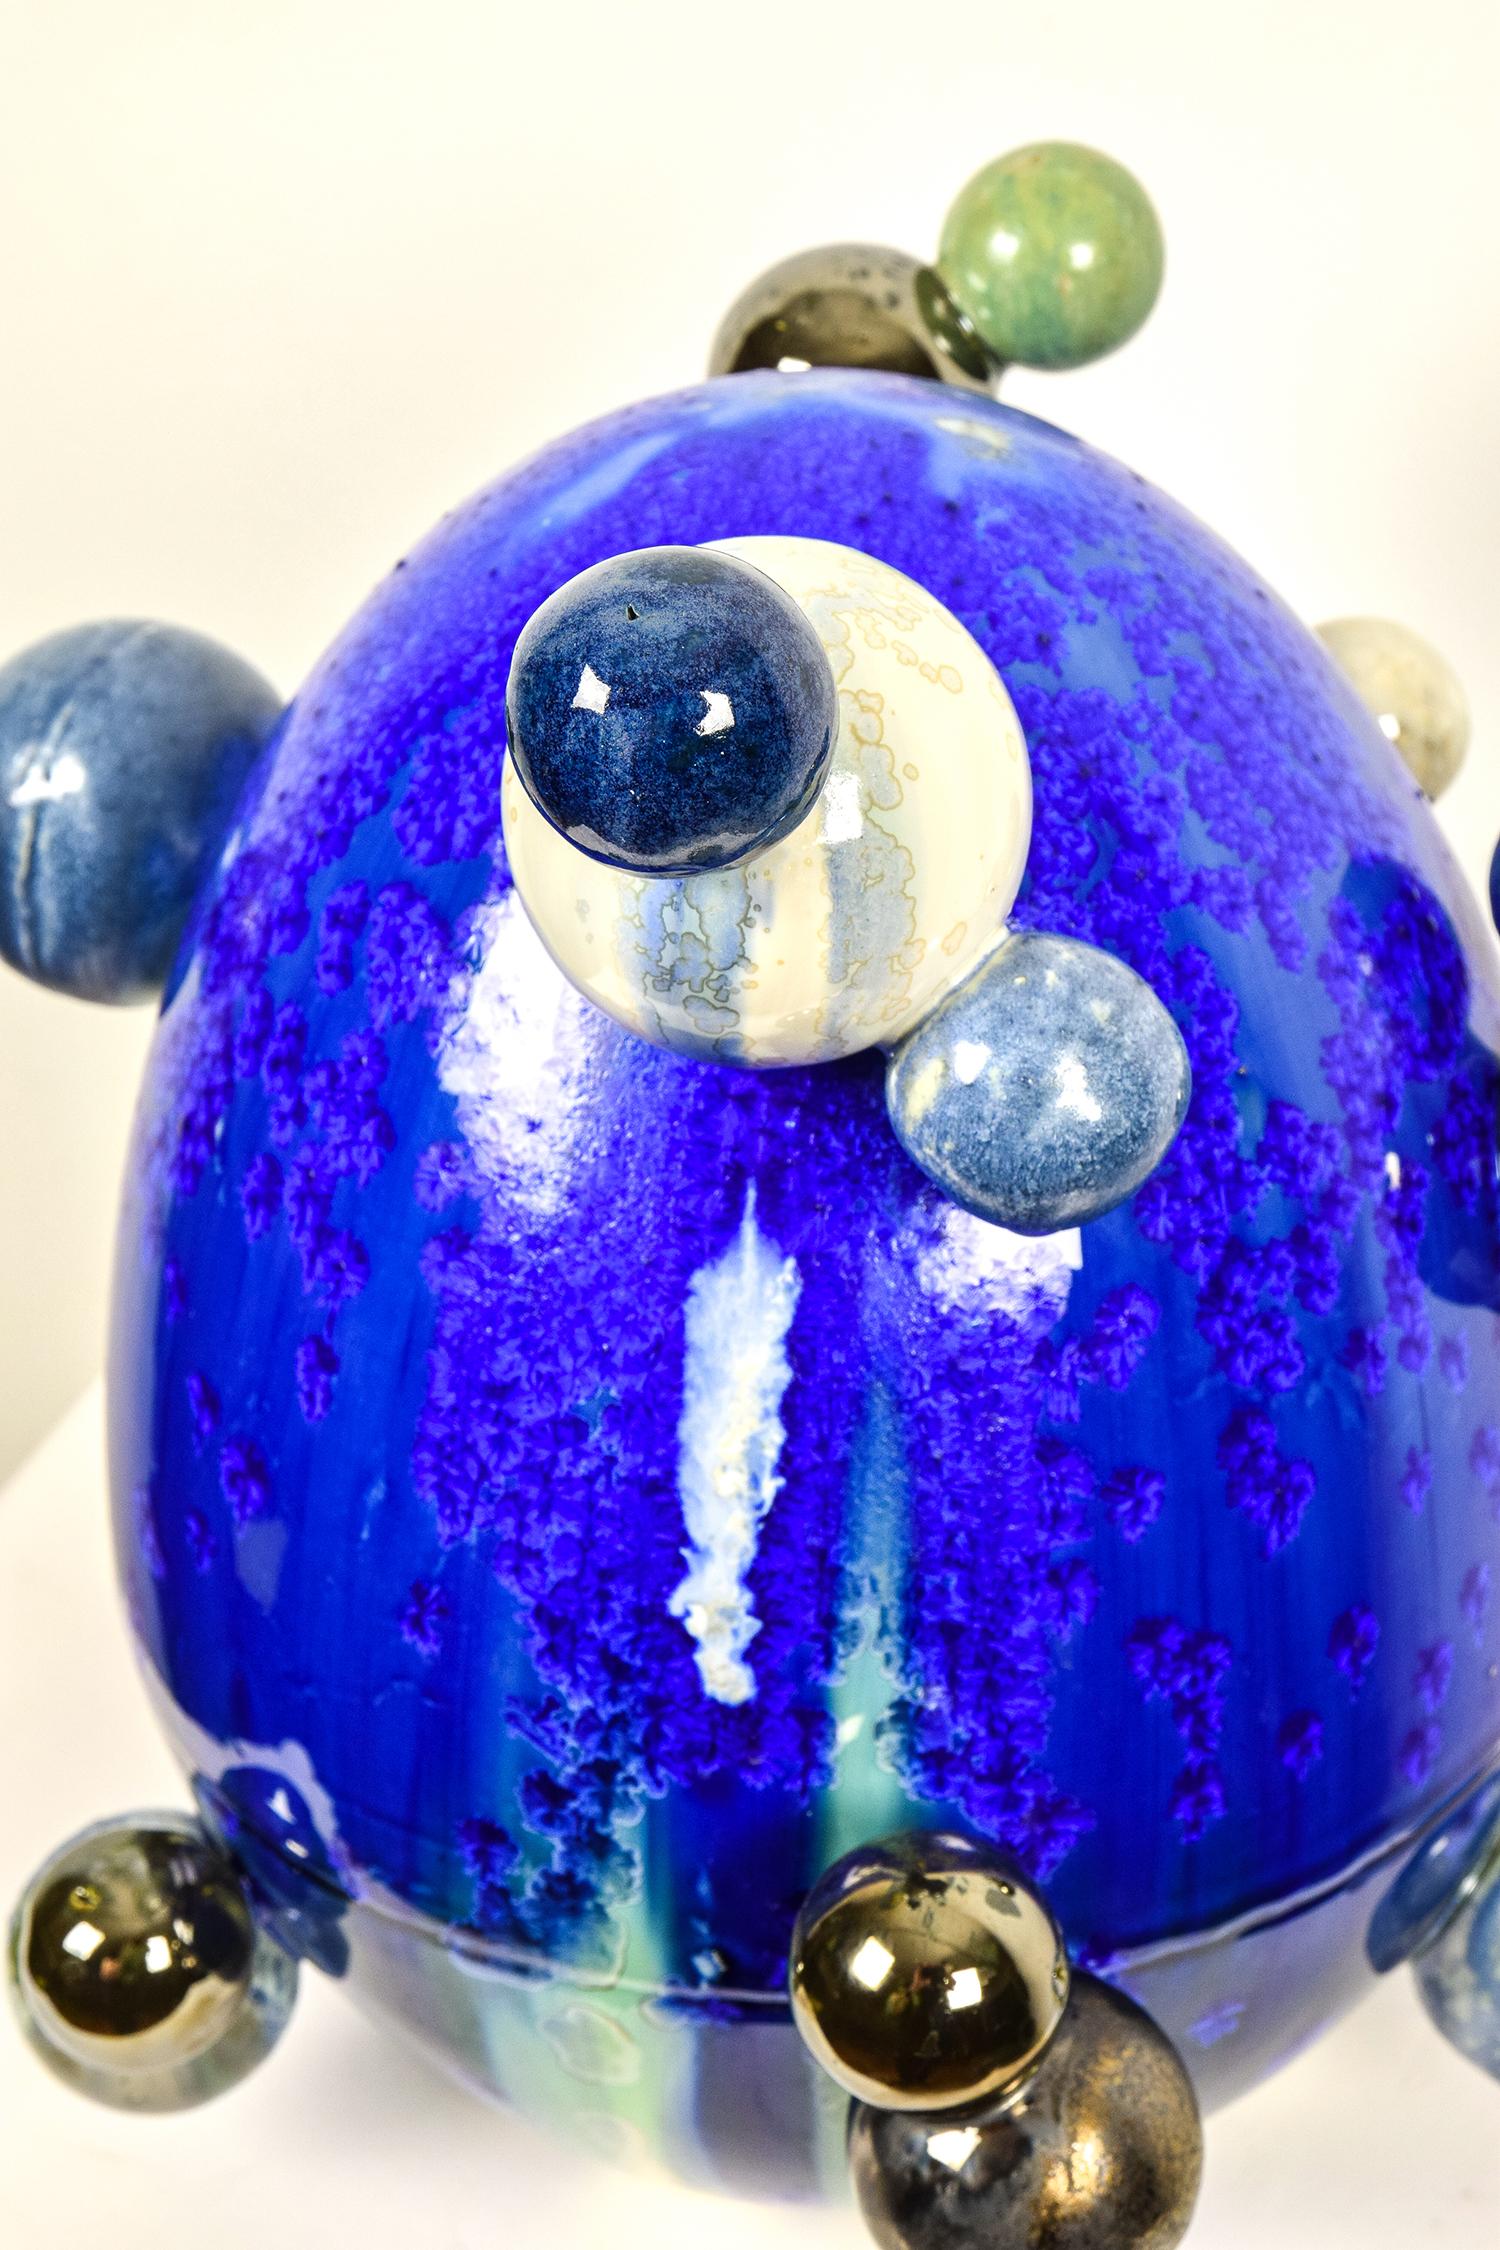 Atomic Egg by NAM TRAN - Unique Hand-Made Sculpture, Blue Egg, Porcelain Art - White Abstract Sculpture by Nam Tran